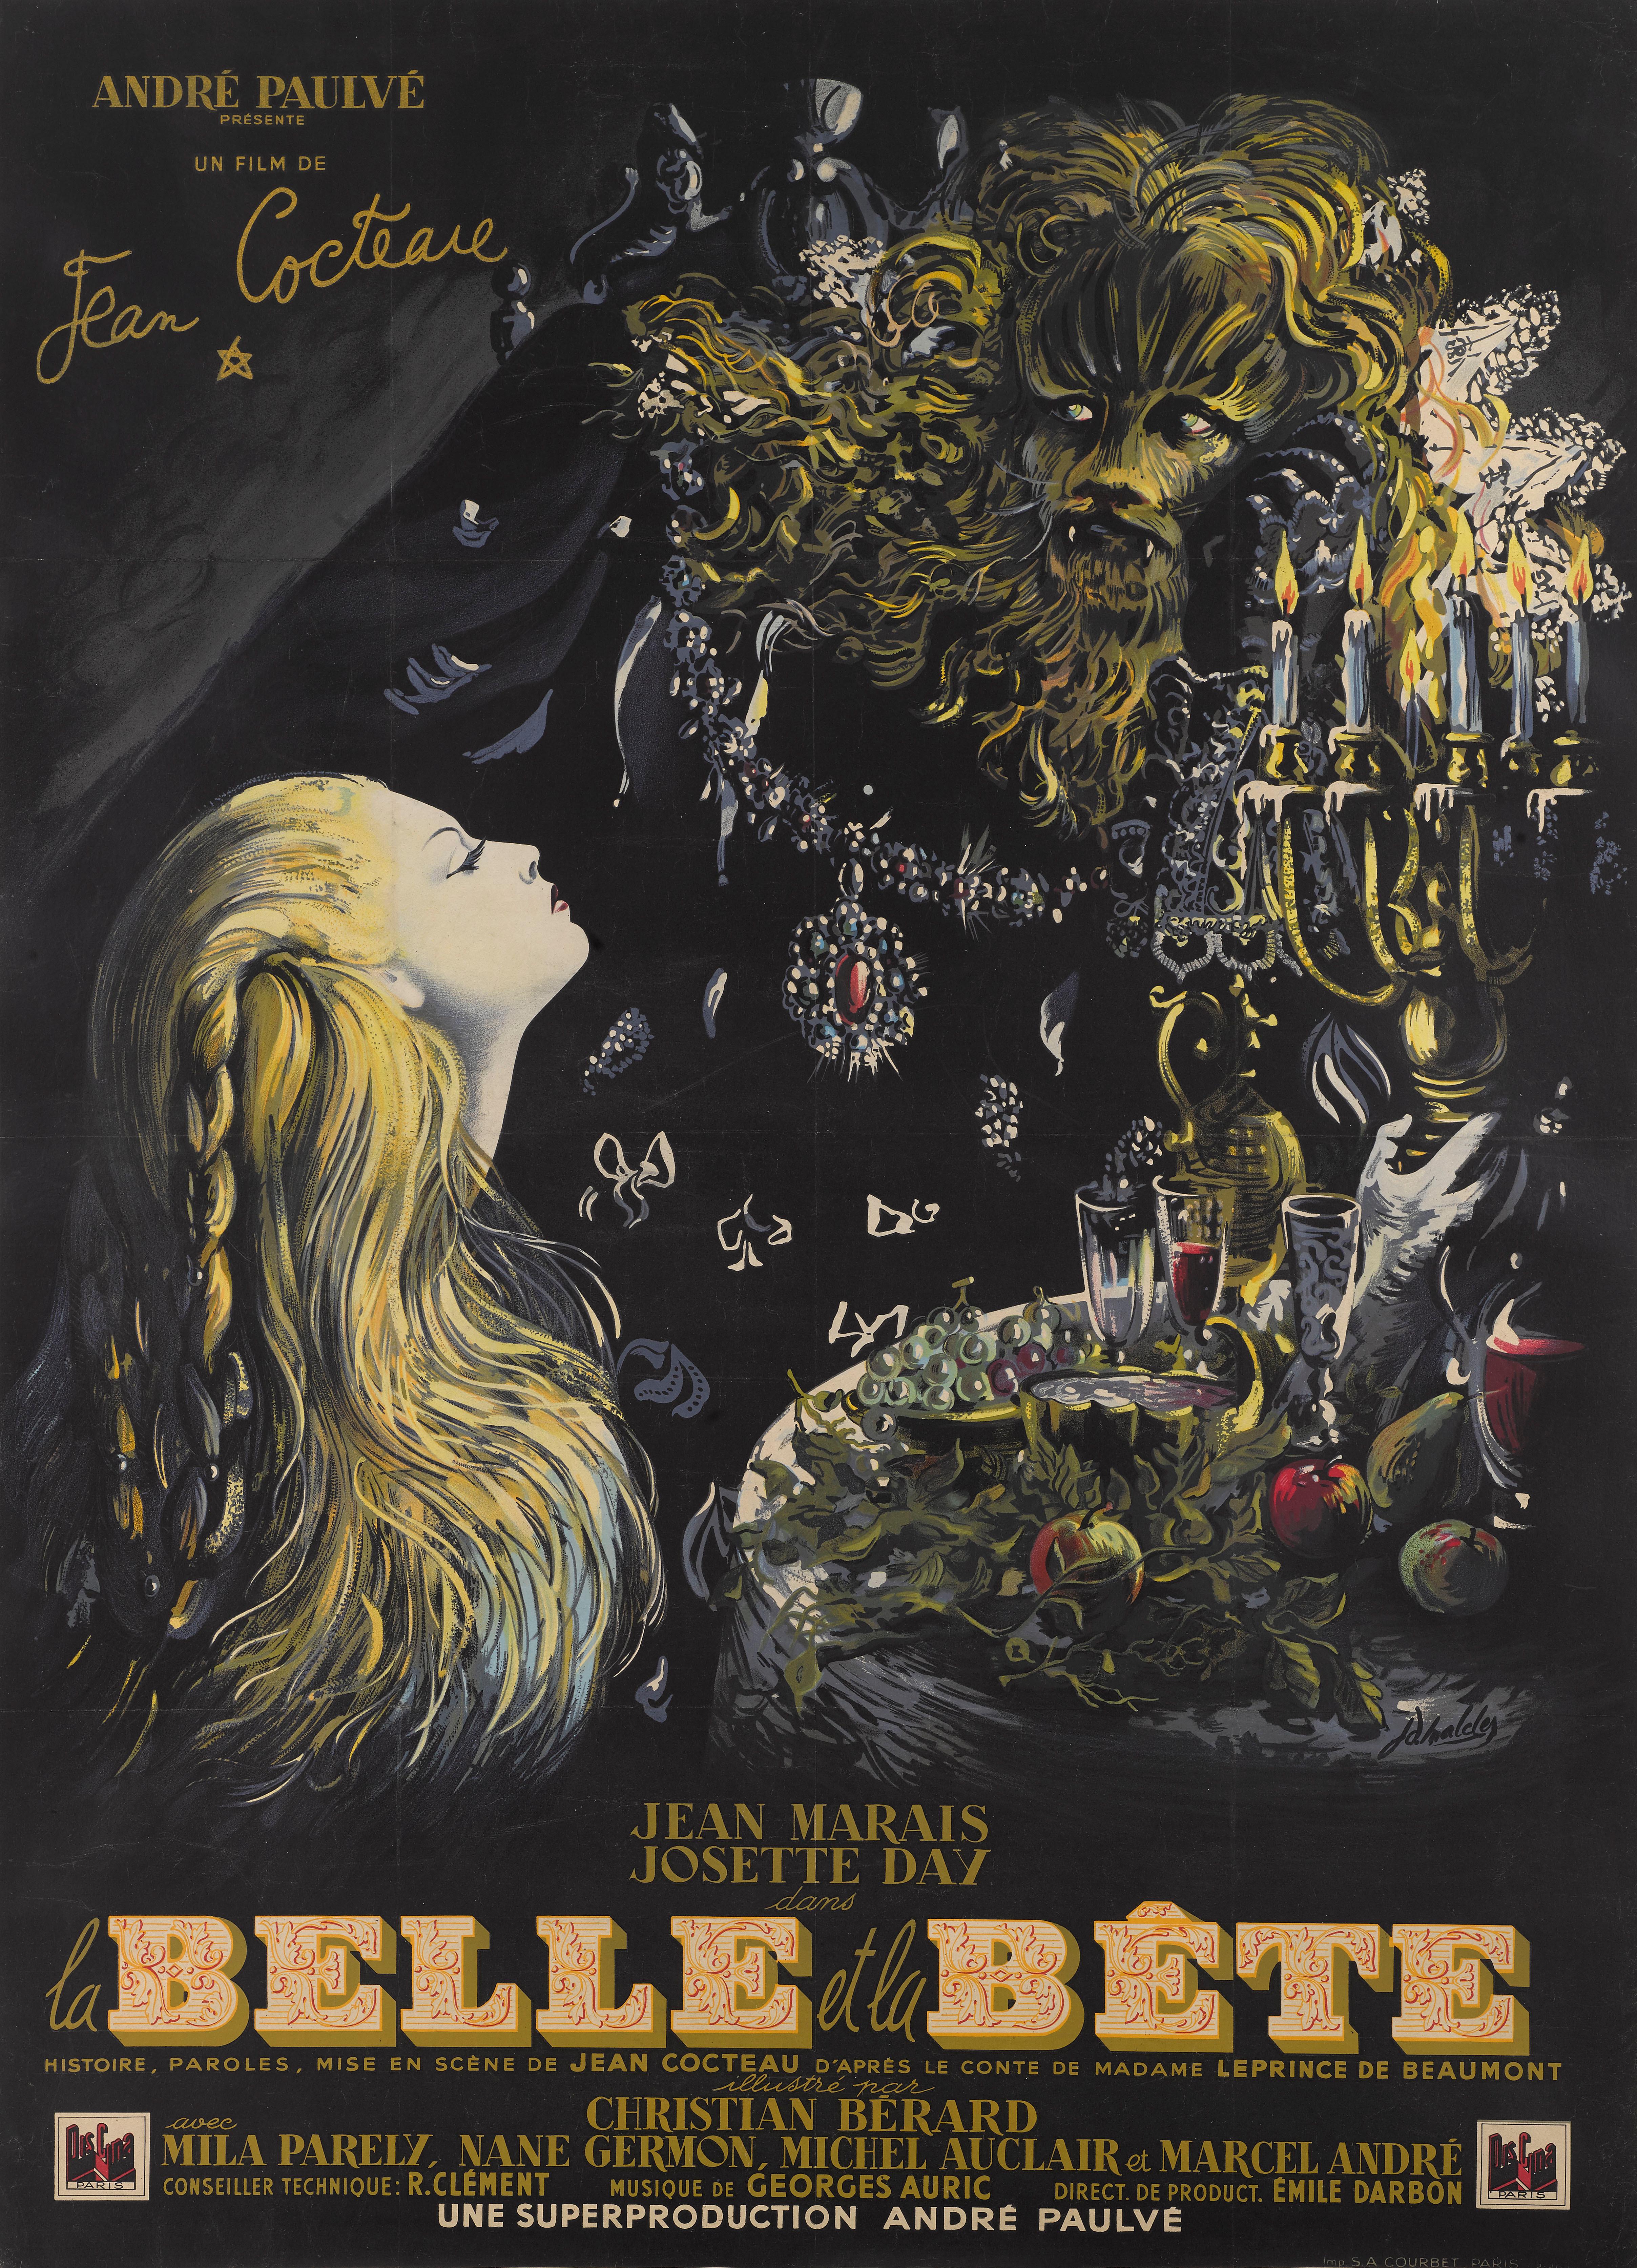 Original French film poster from the Classic 1946 fantasy film.
Gabrielle-Suzanne Barbot de Villeneuve's novel, La Belle et la Bête, was published in France in 1740. In 1946 Jean Cocteau adapted the book into its first feature film. Cocteau's